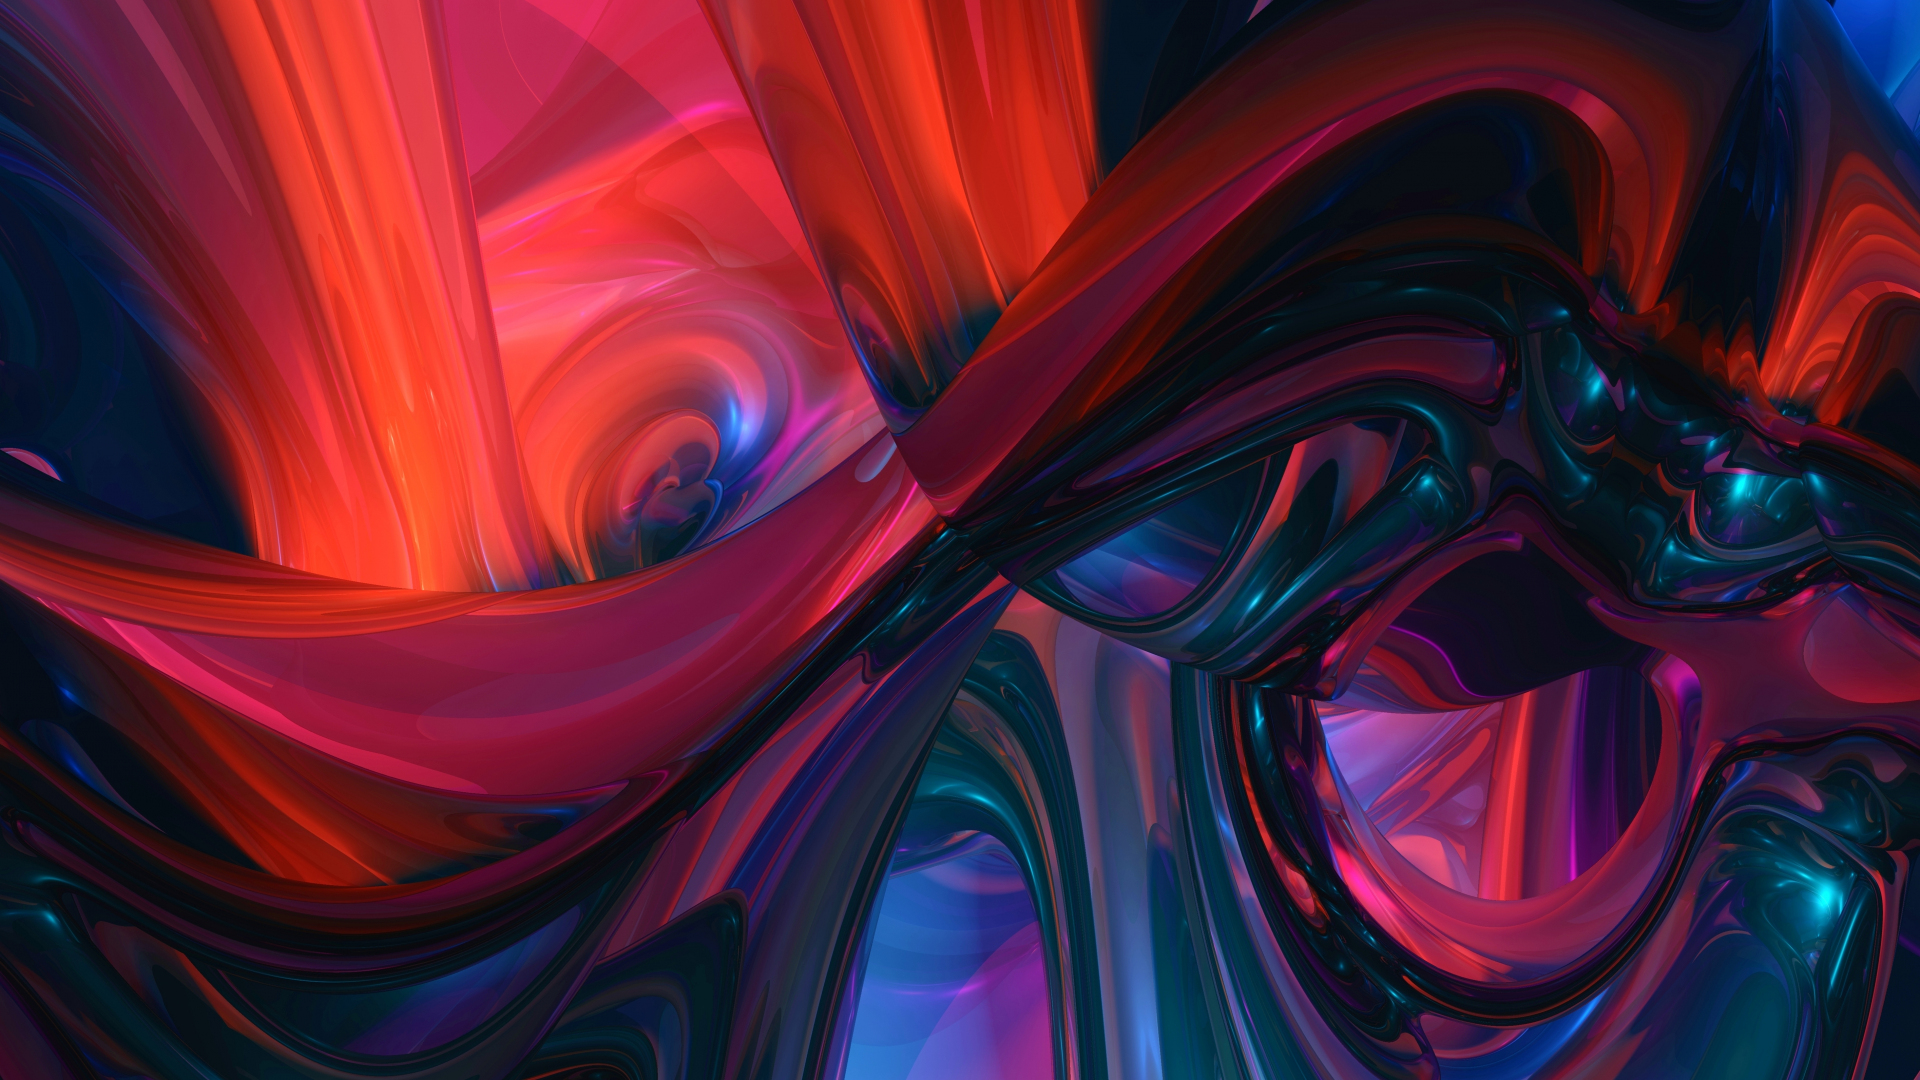 Download wallpaper 1920x1080 fractal, wavy, tangled, colorful, full hd, hdtv,  fhd, 1080p wallpaper, 1920x1080 hd background, 21970